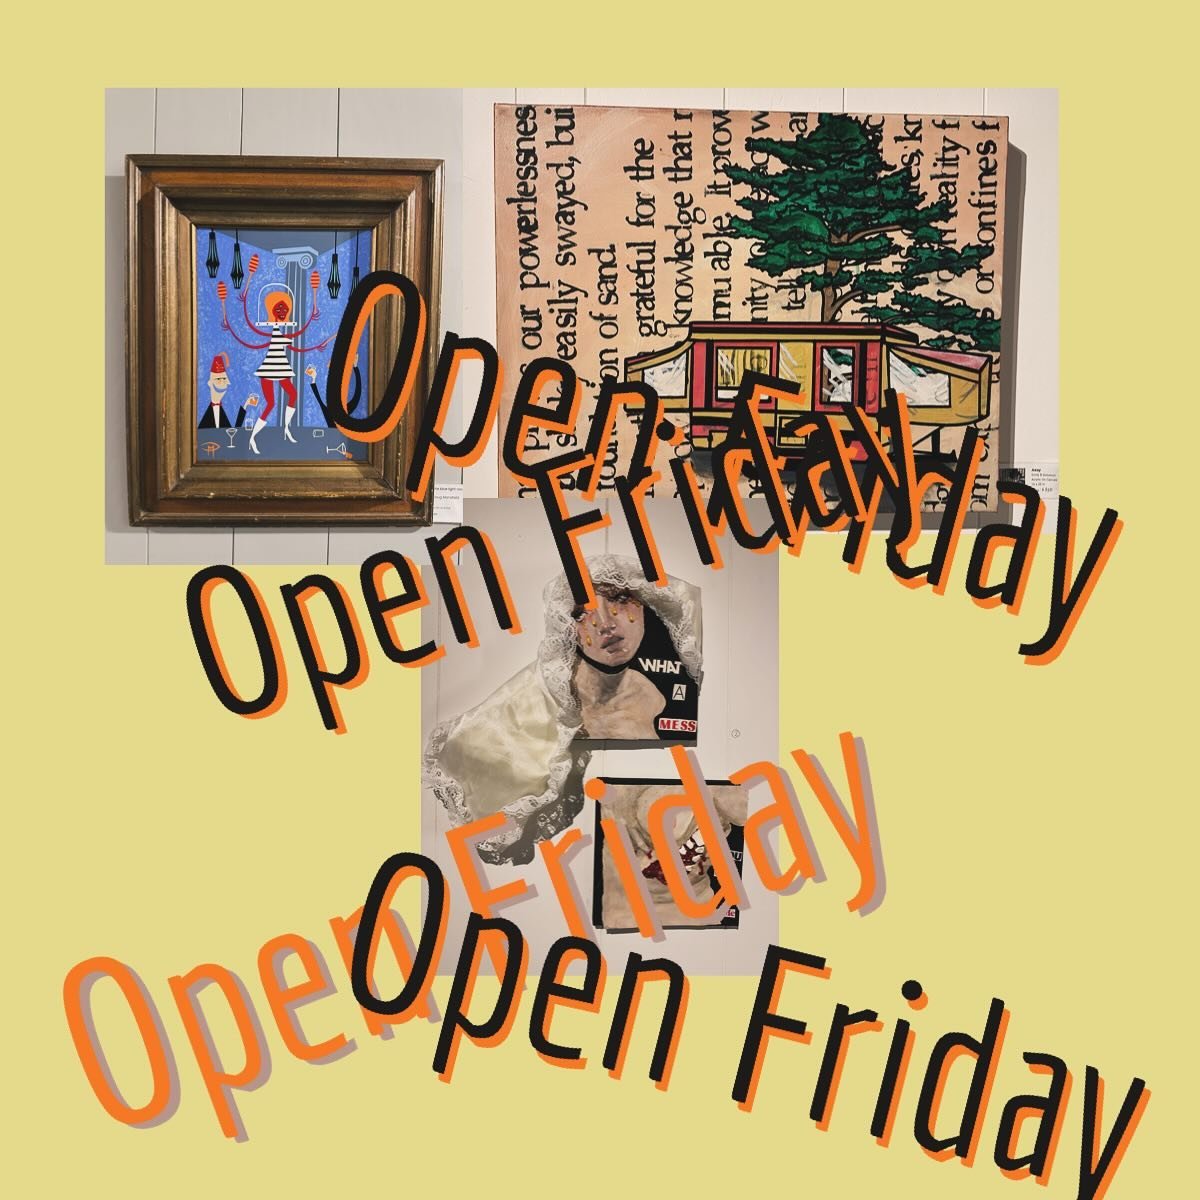 We are open Friday 12-4
Pull up and peruse our featured artists @intoxic.kate @east_of_emily works. Come say hello, take a tour.
#supportlocalartists #supportcommunity #supportlocalbusiness